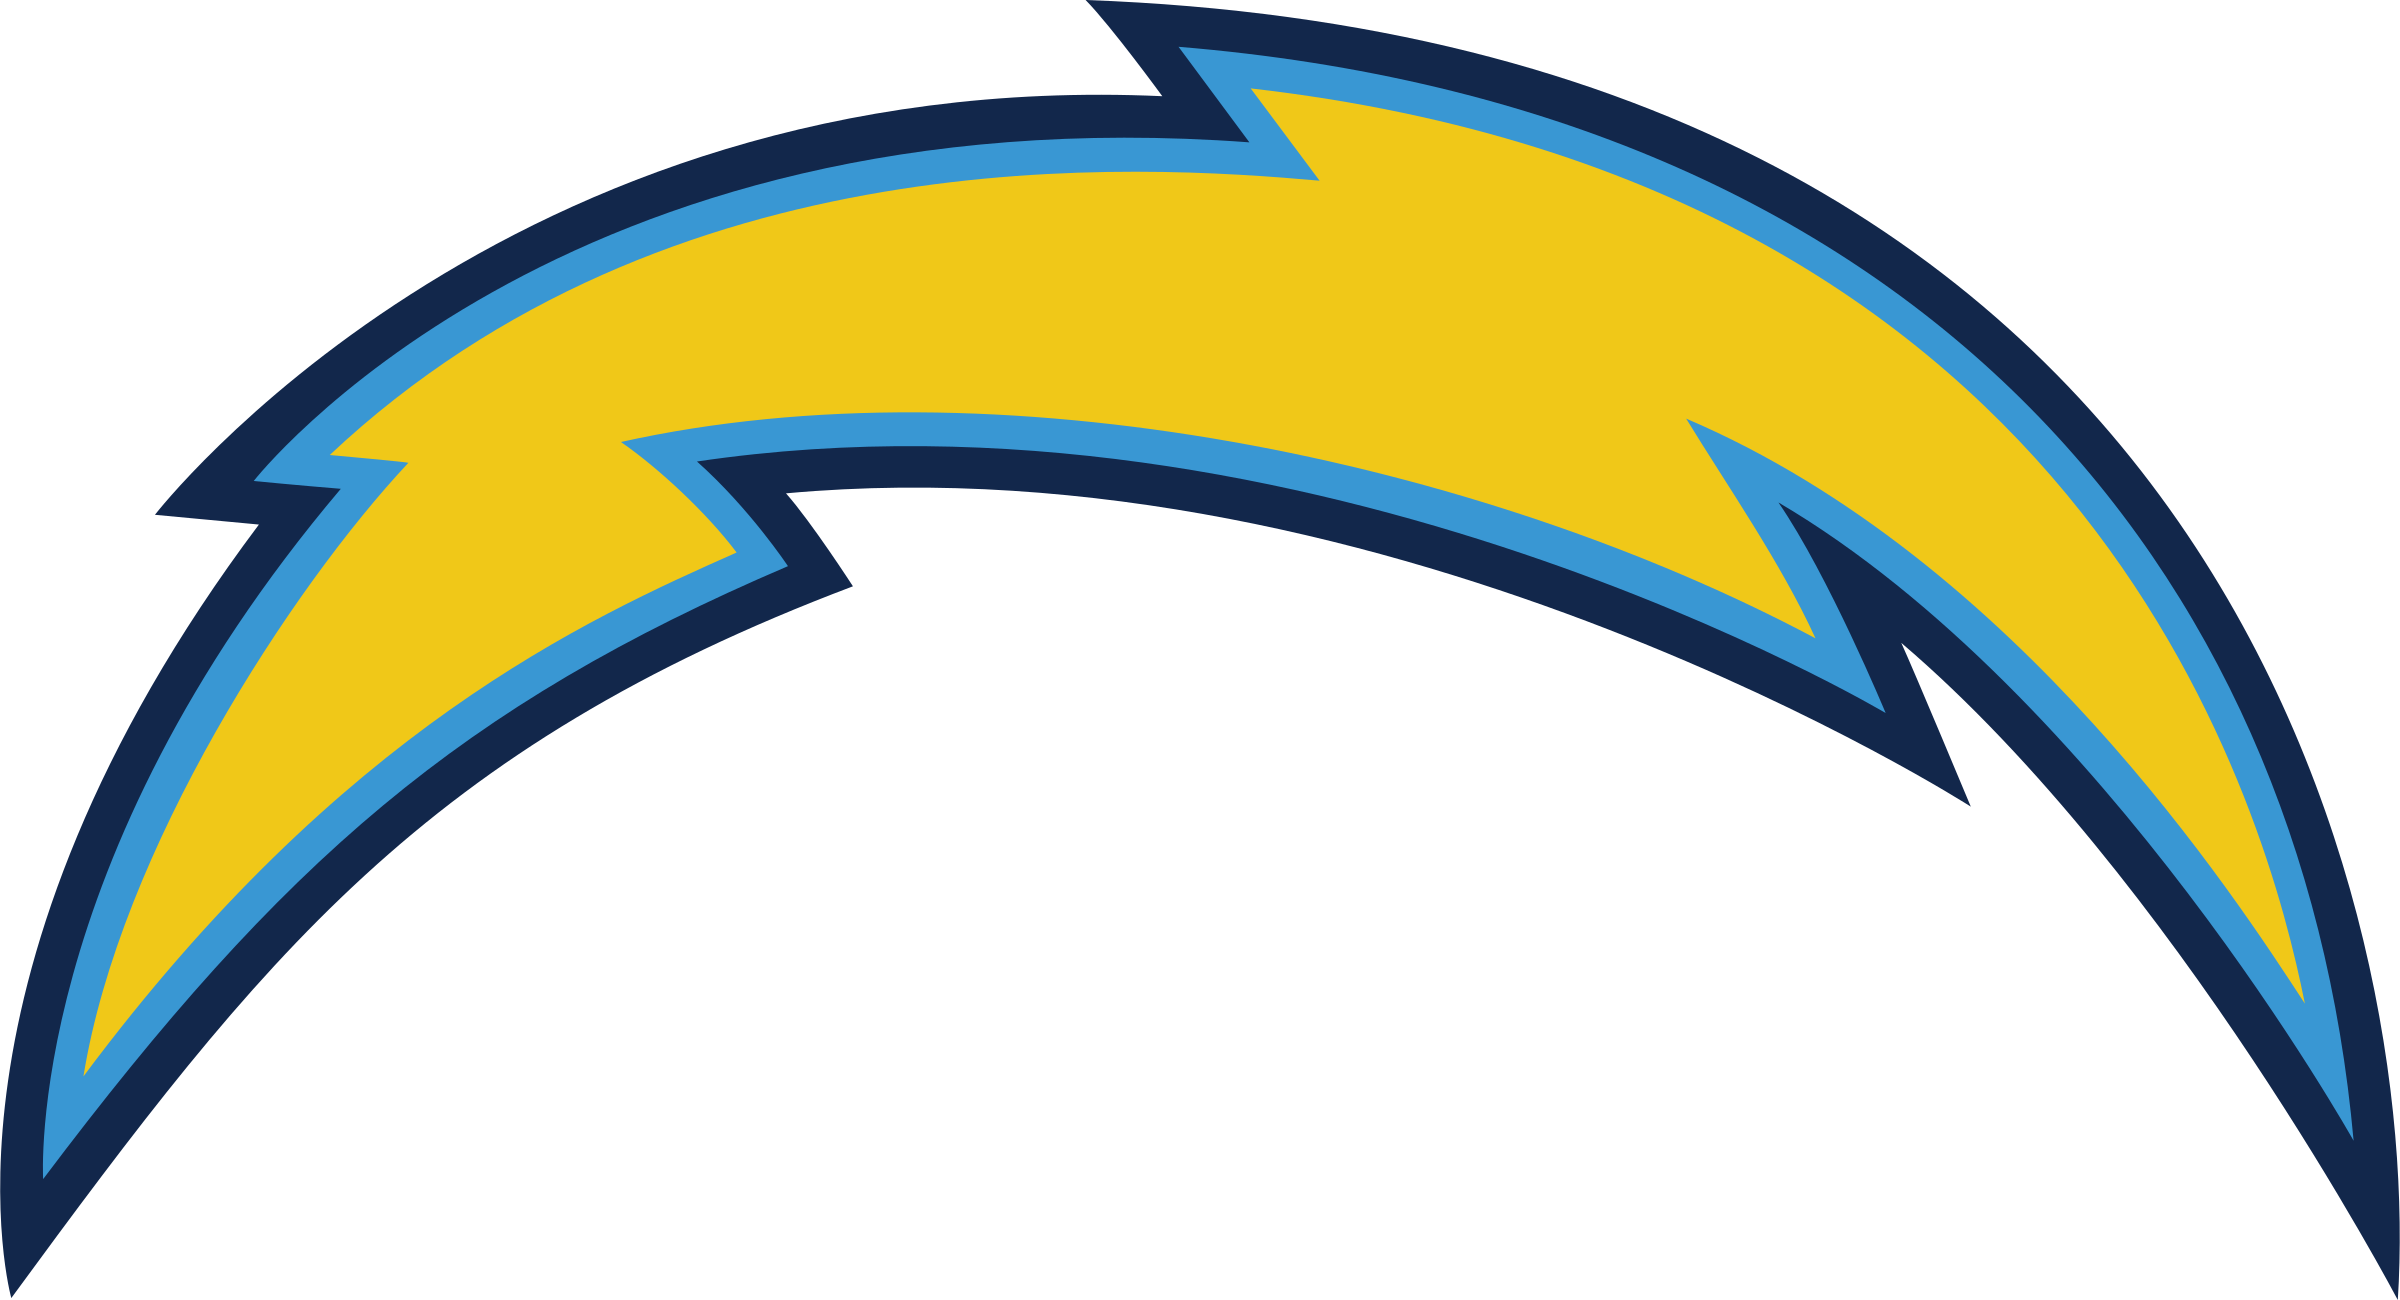 San Diego Chargers Logo Png Transparent & Svg Vector - San Diego Chargers Logo Png (2400x1300)